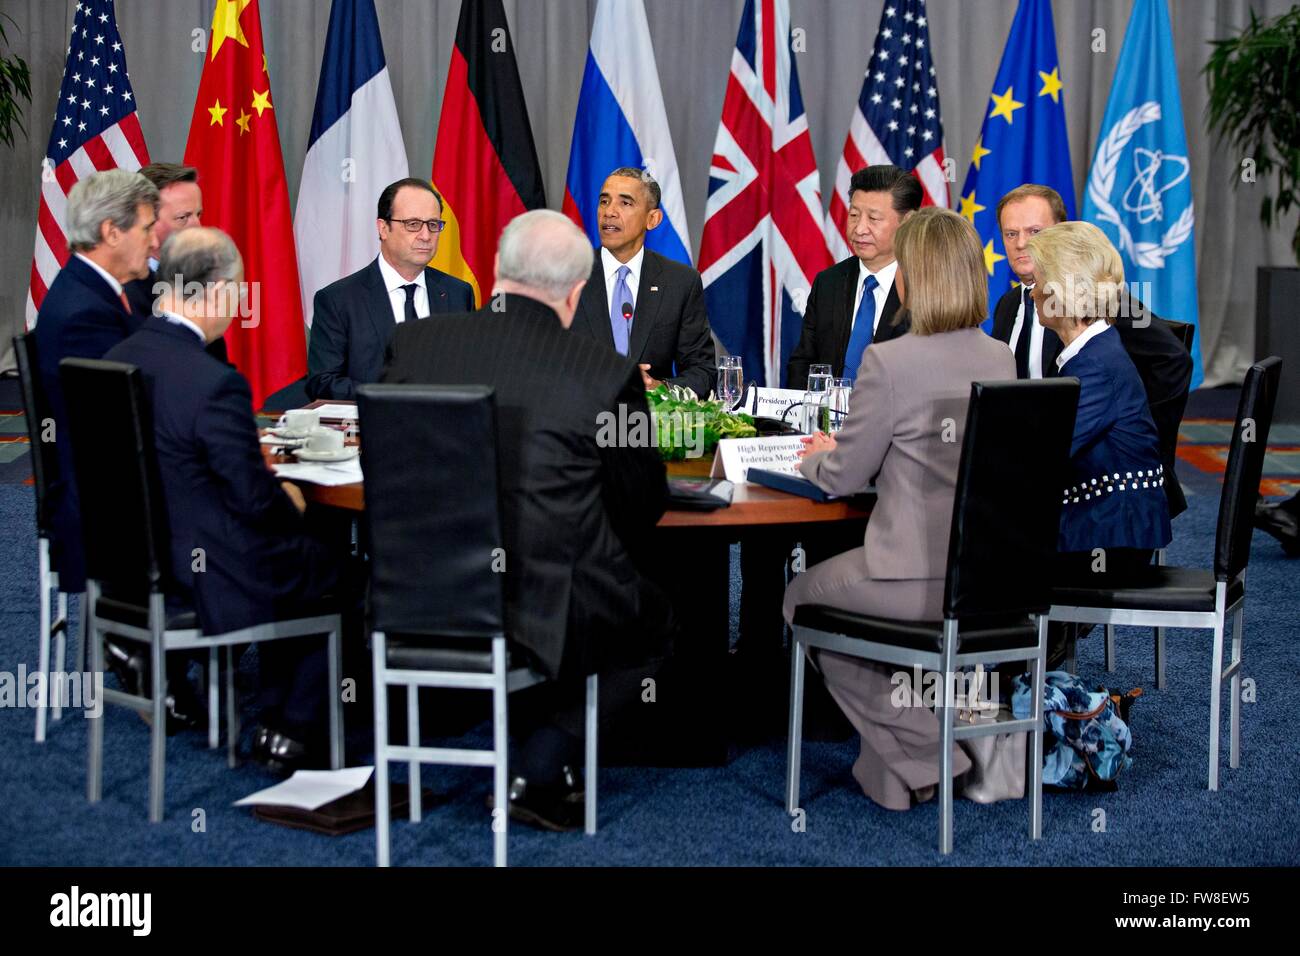 United States President Barack Obama, center, speaks as Xi Jinping, China's president, right, and Francois Hollande, France's president, left, listen during a P5 1 multilateral meeting at the Nuclear Security Summit in Washington, DC, U.S., on Friday, April 1, 2016. After a spate of terrorist attacks from Europe to Africa, Obama is rallying international support during the summit for an effort to keep Islamic State and similar groups from obtaining nuclear material and other weapons of mass destruction. Credit: Andrew Harrer/Pool via CNP - NO WIRE SERVICE - Stock Photo